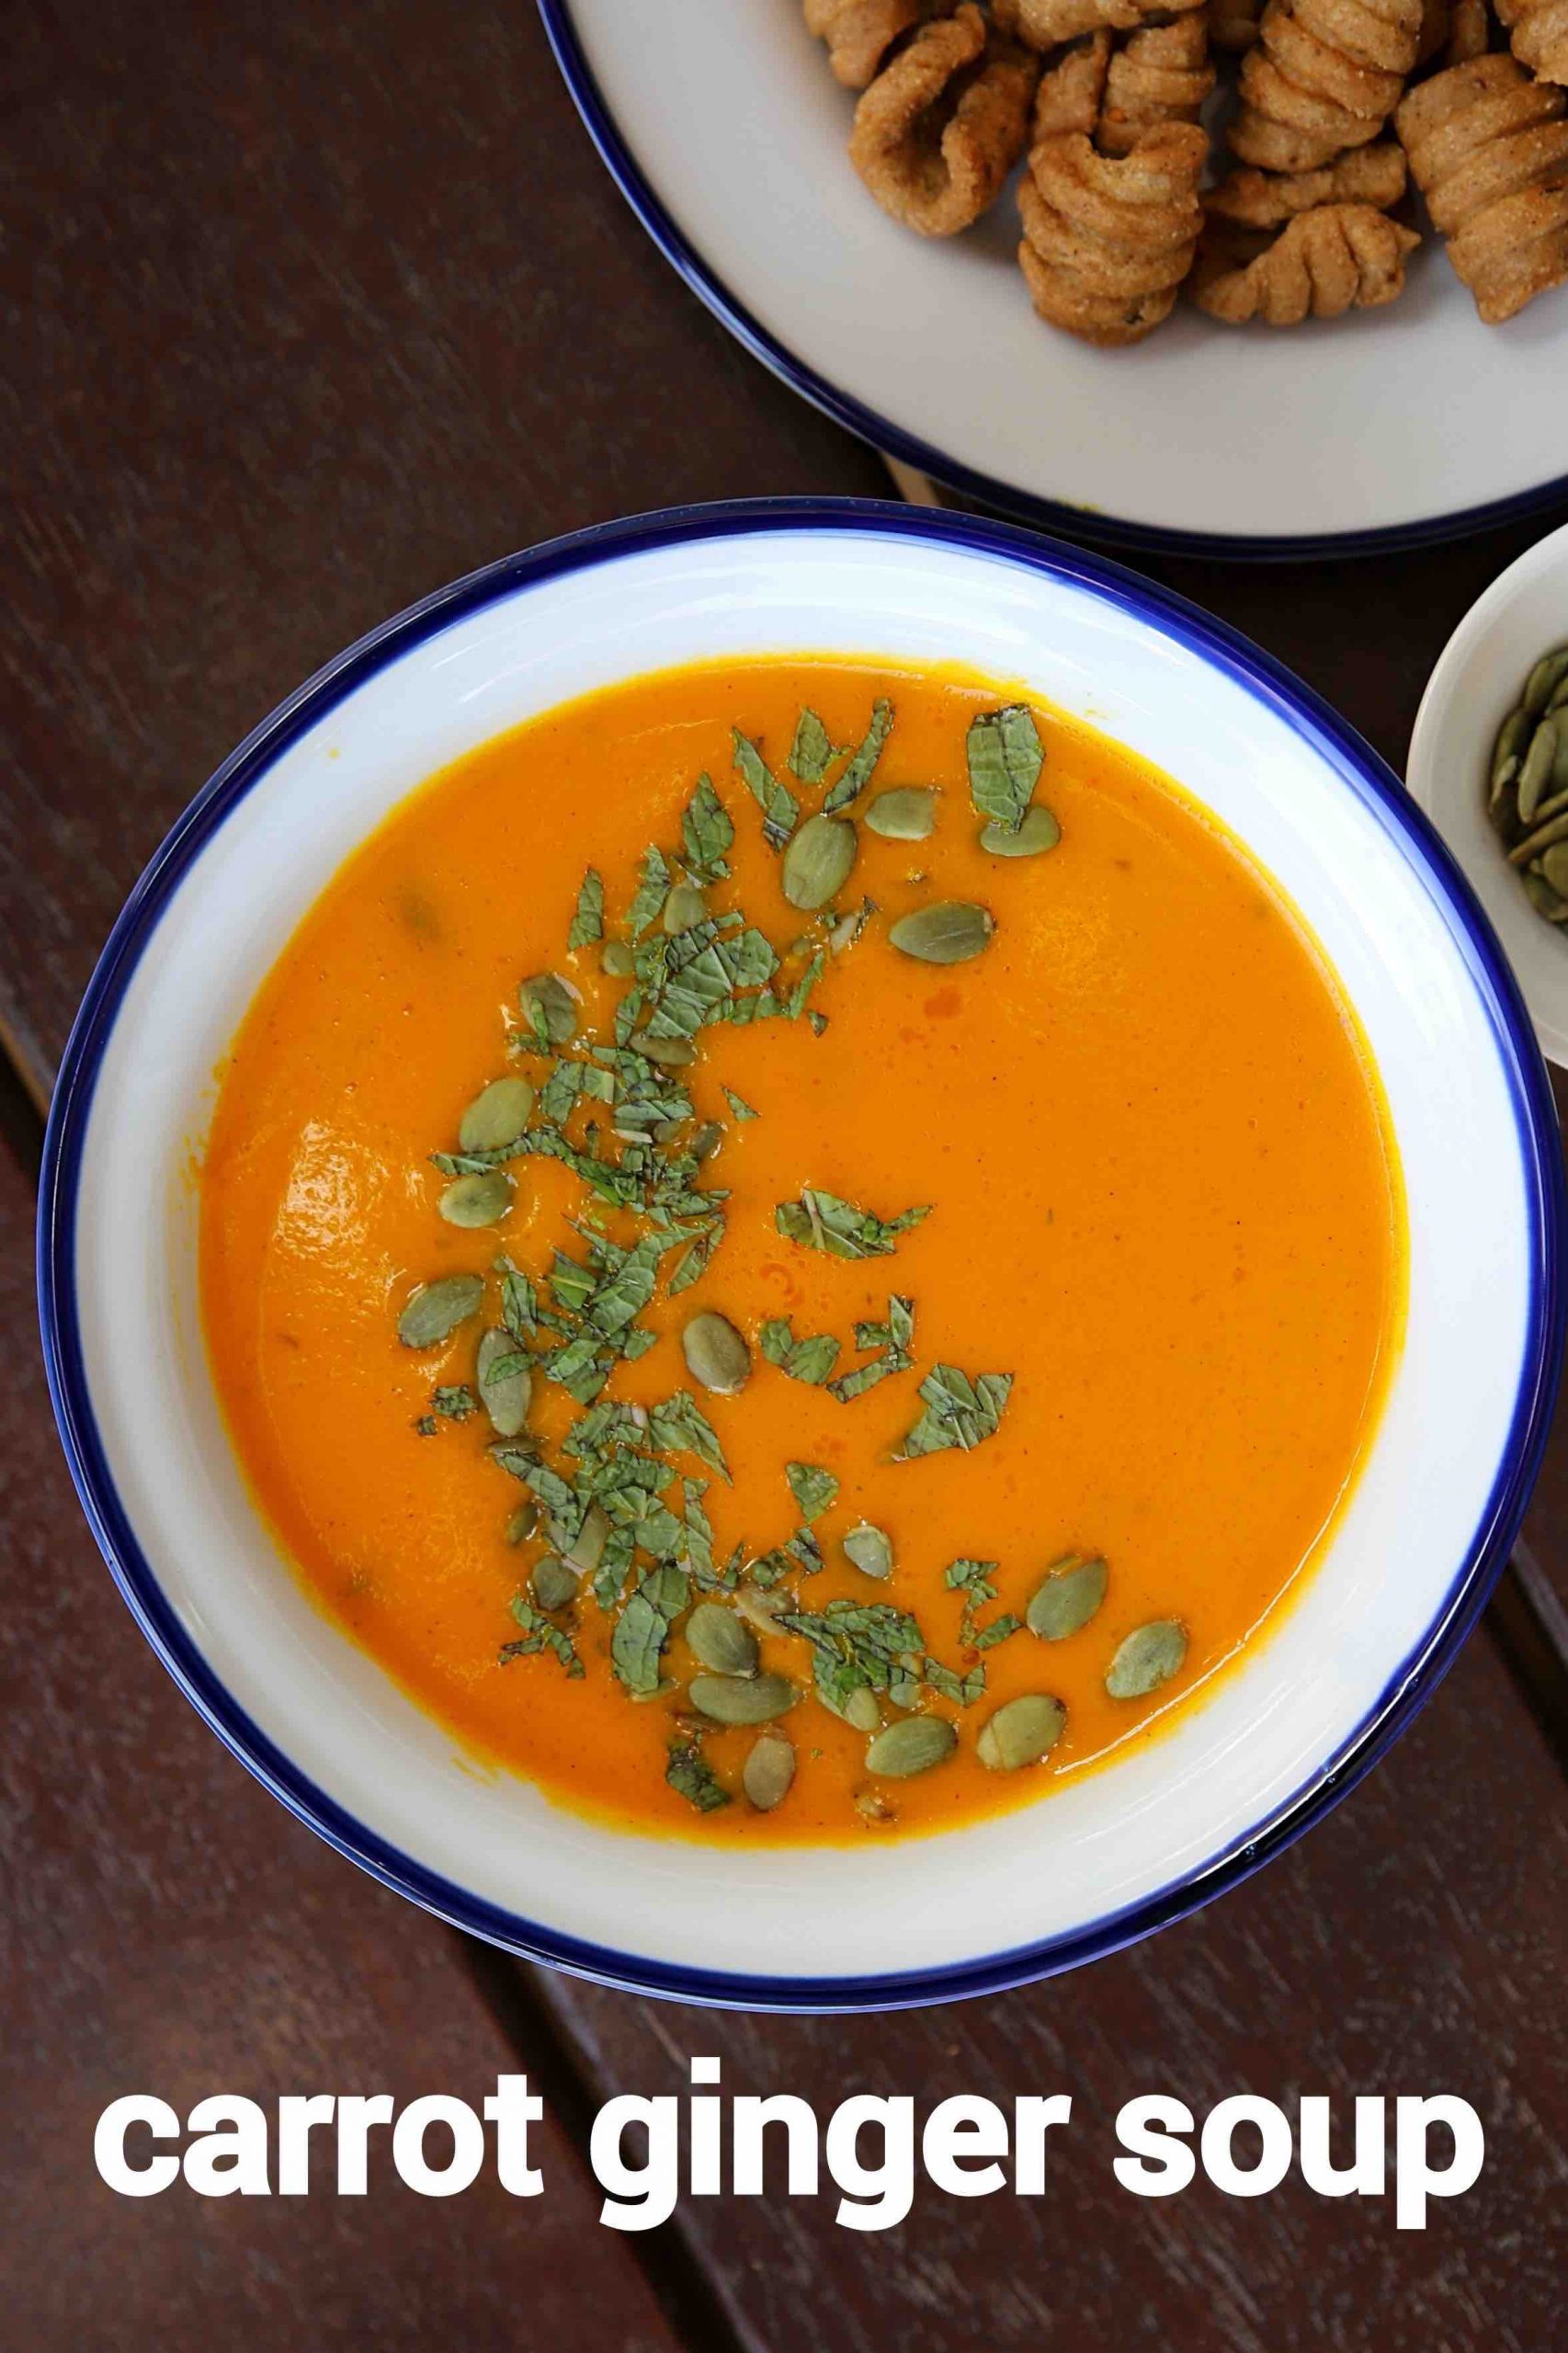 https://hebbarskitchen.com/wp-content/uploads/2020/01/carrot-ginger-soup-recipe-carrot-and-ginger-soup-ginger-carrot-soup-2-scaled.jpeg